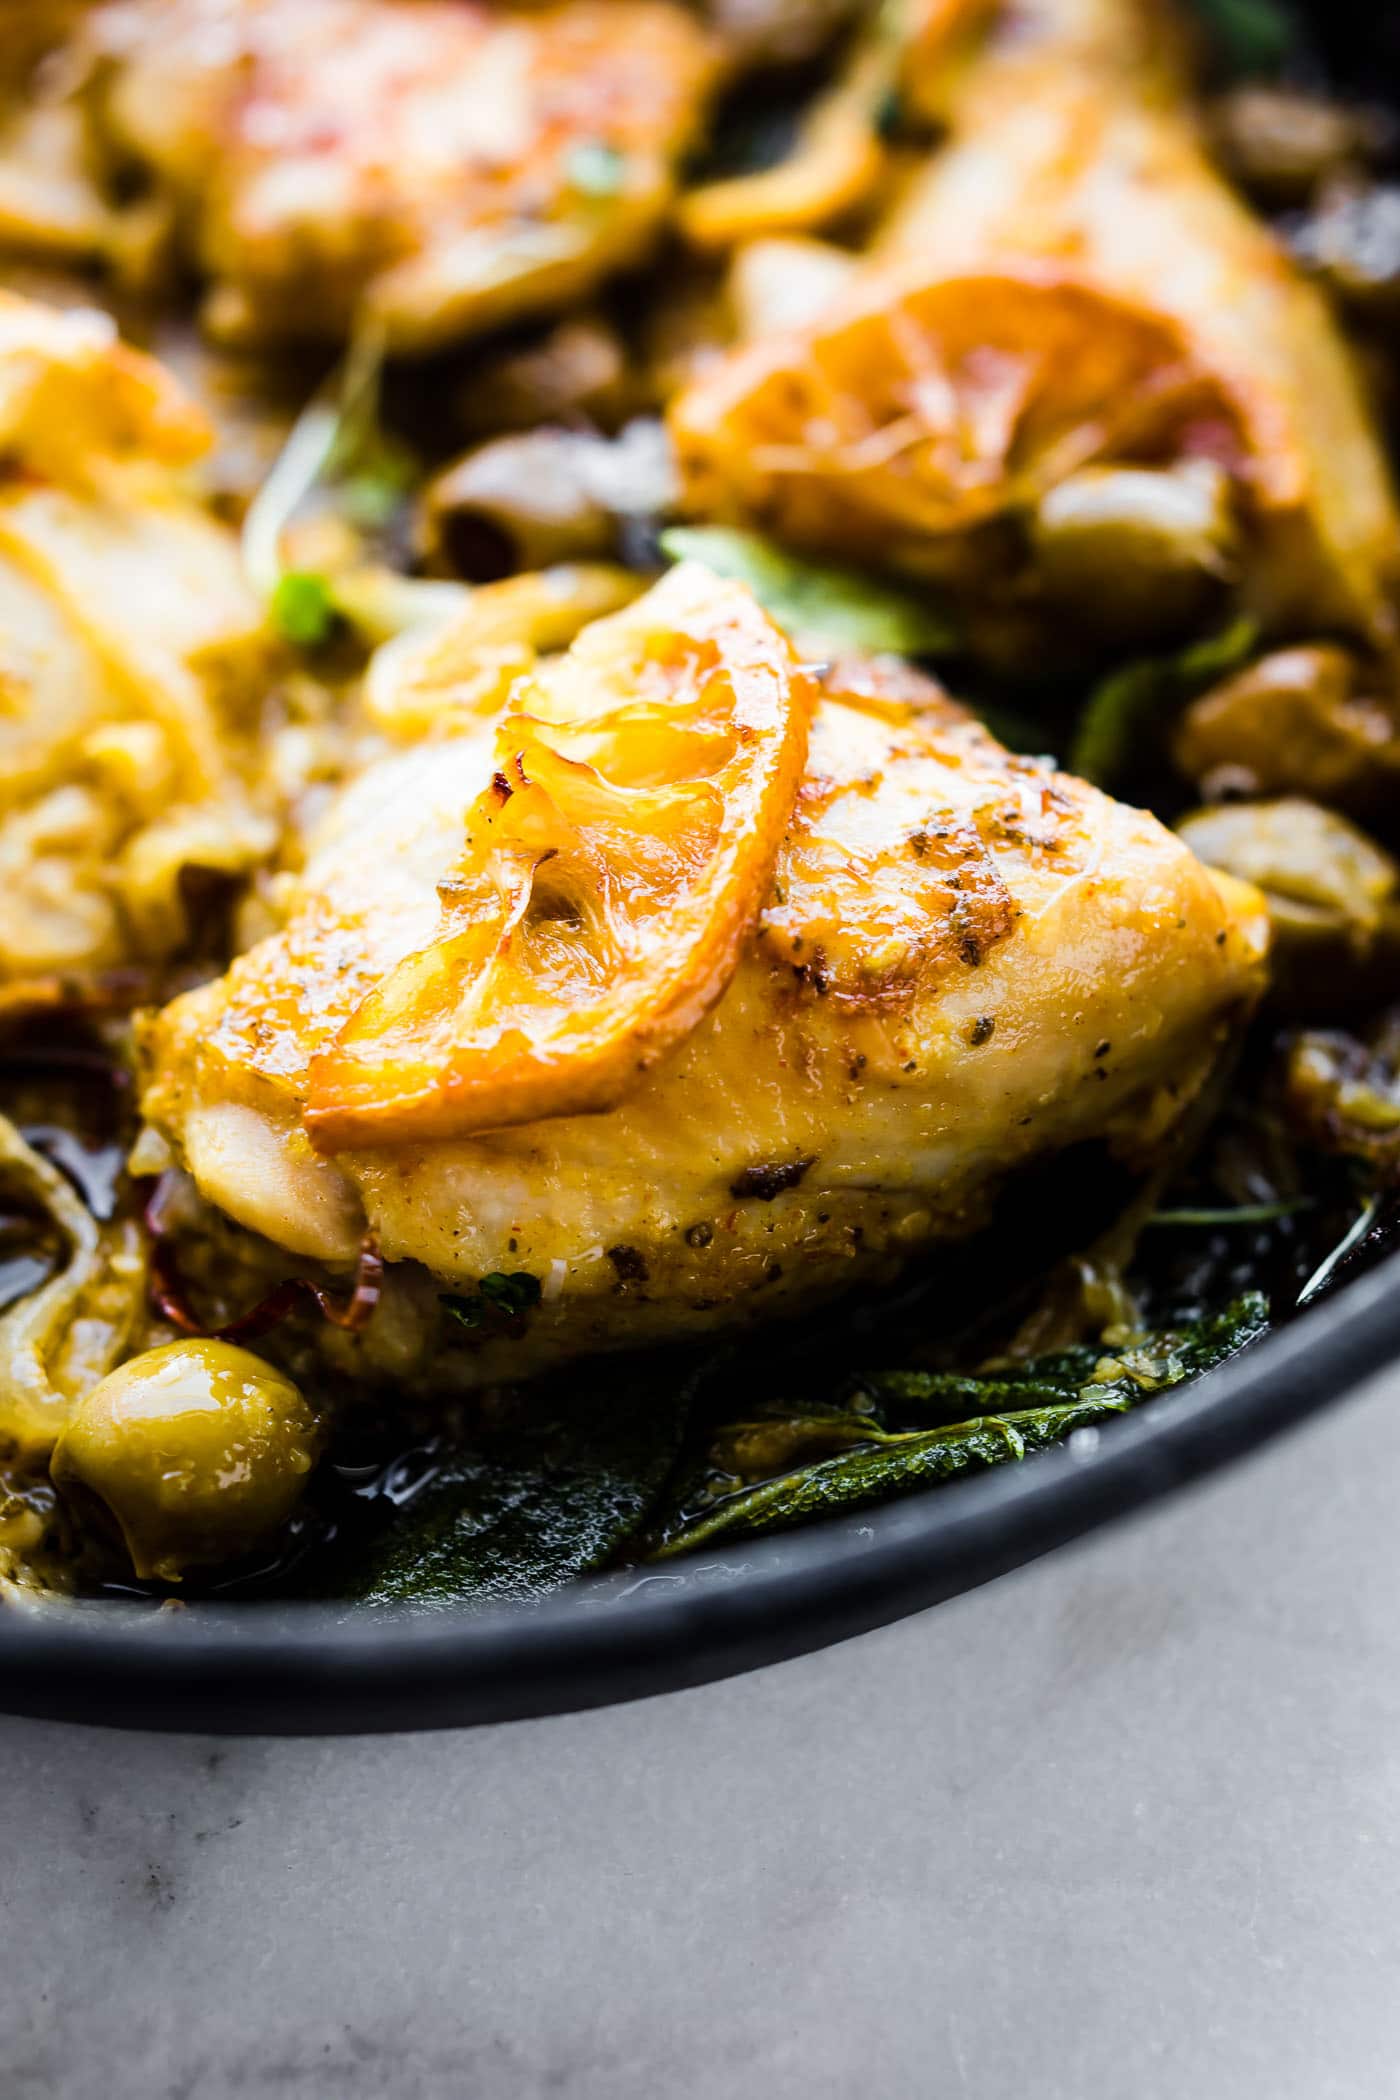 one pan lemon sage baked chicken with olives. Paleo, whole 30